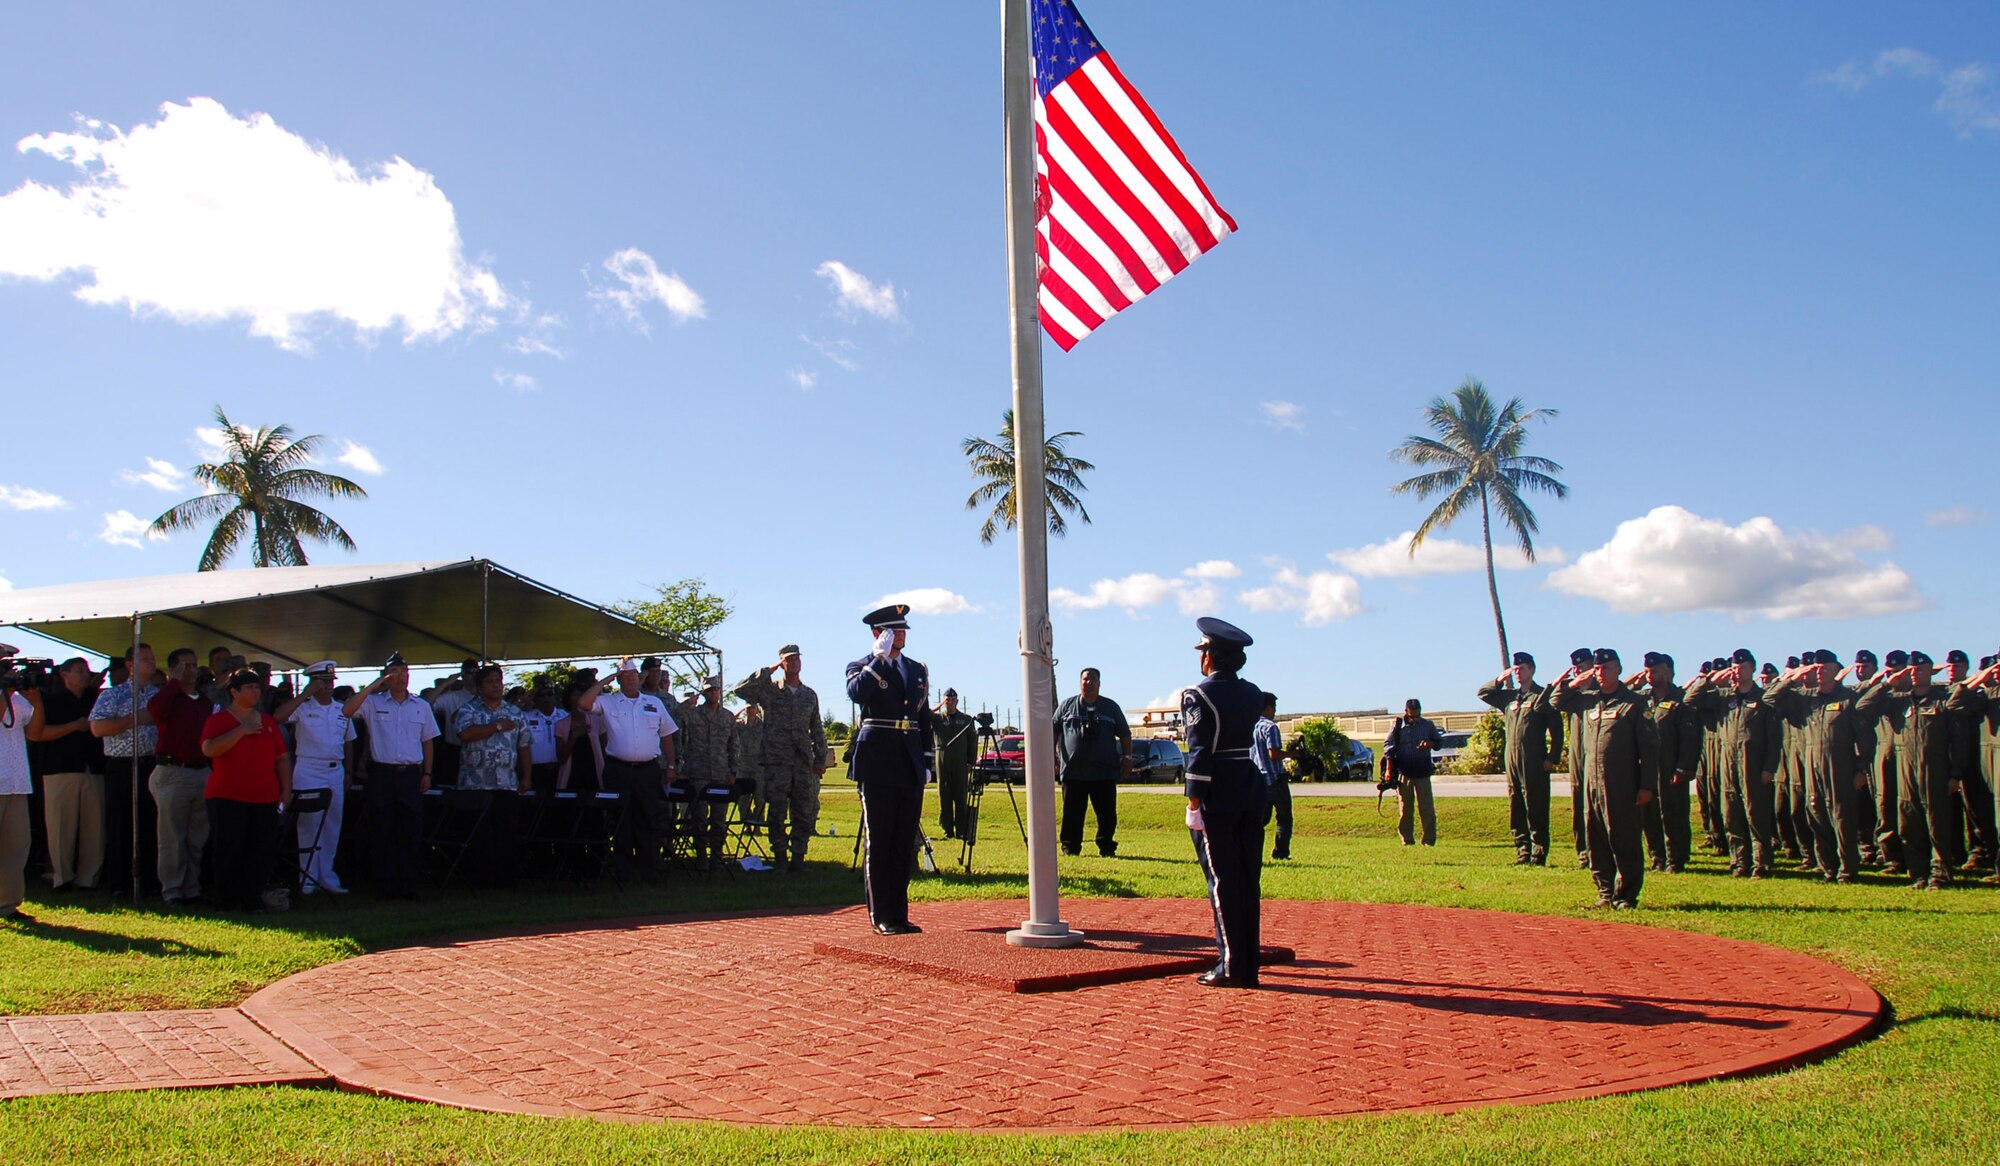 Team Andersen Airmen and audience members render a salute as Taps is played, in honor of the lives of 33 men and women that were lost during Operation Linebacker ll, at a memorial ceremony on Andersen Air Force Base, Guam, Dec. 17.  The ceremony commemorates the 38th anniversary of the campaign that led to the end of the Vietnam War.  (U.S. Air Force photo/Staff Sgt. Jamie Powell)